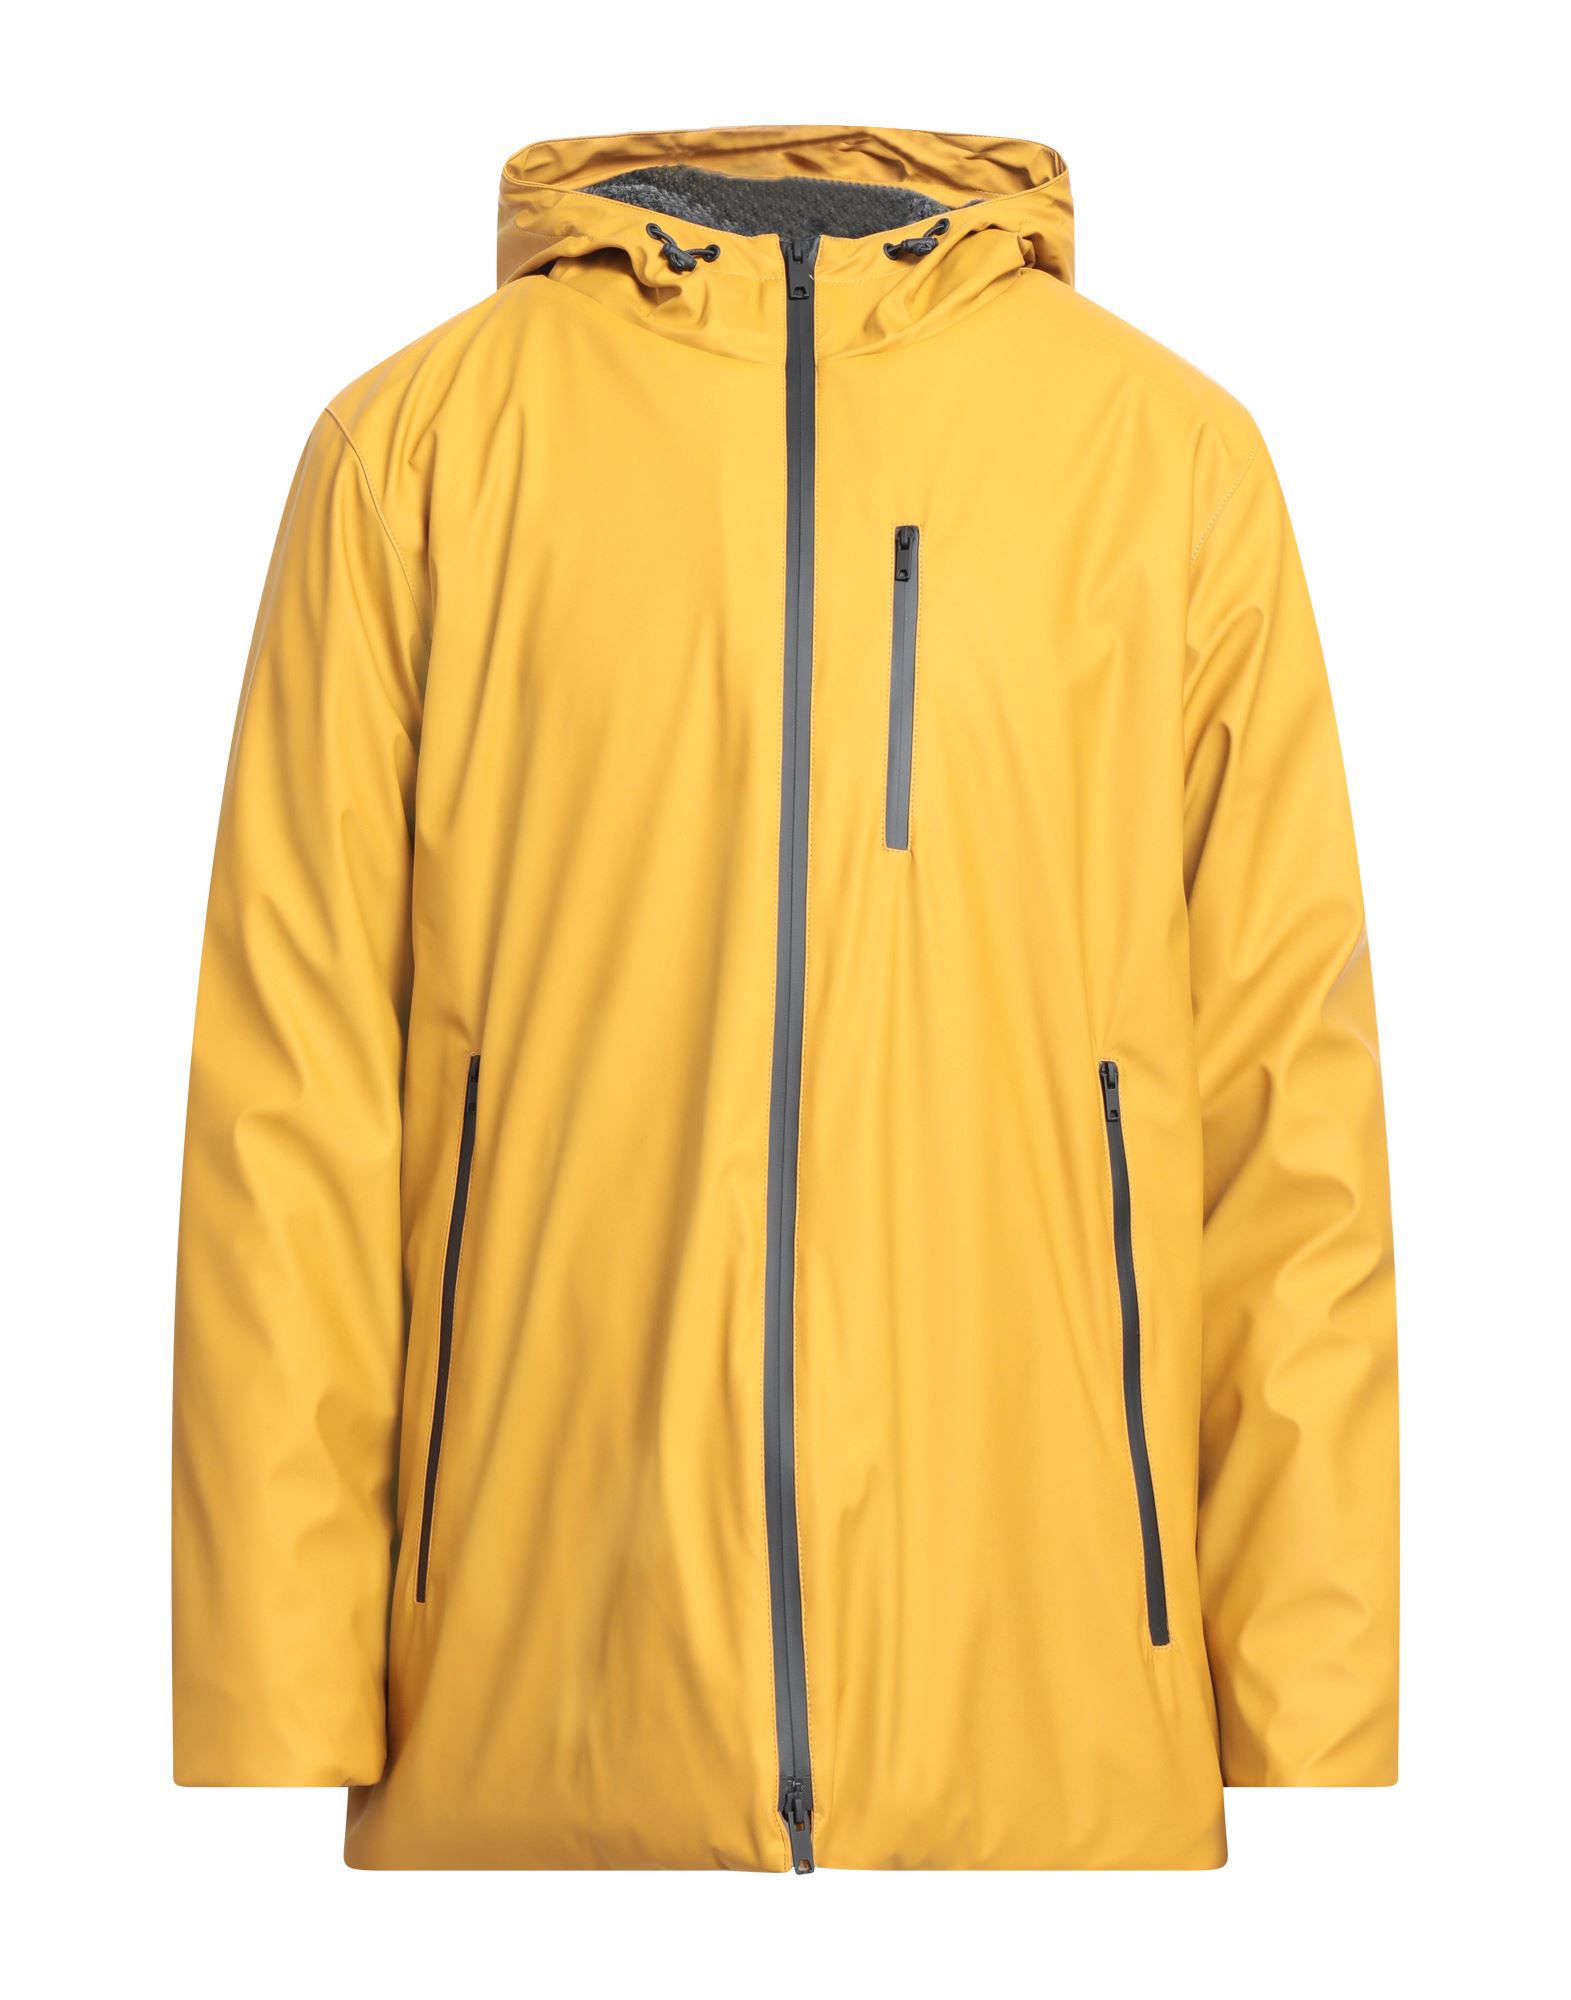 Homeward Clothes Jackets In Yellow